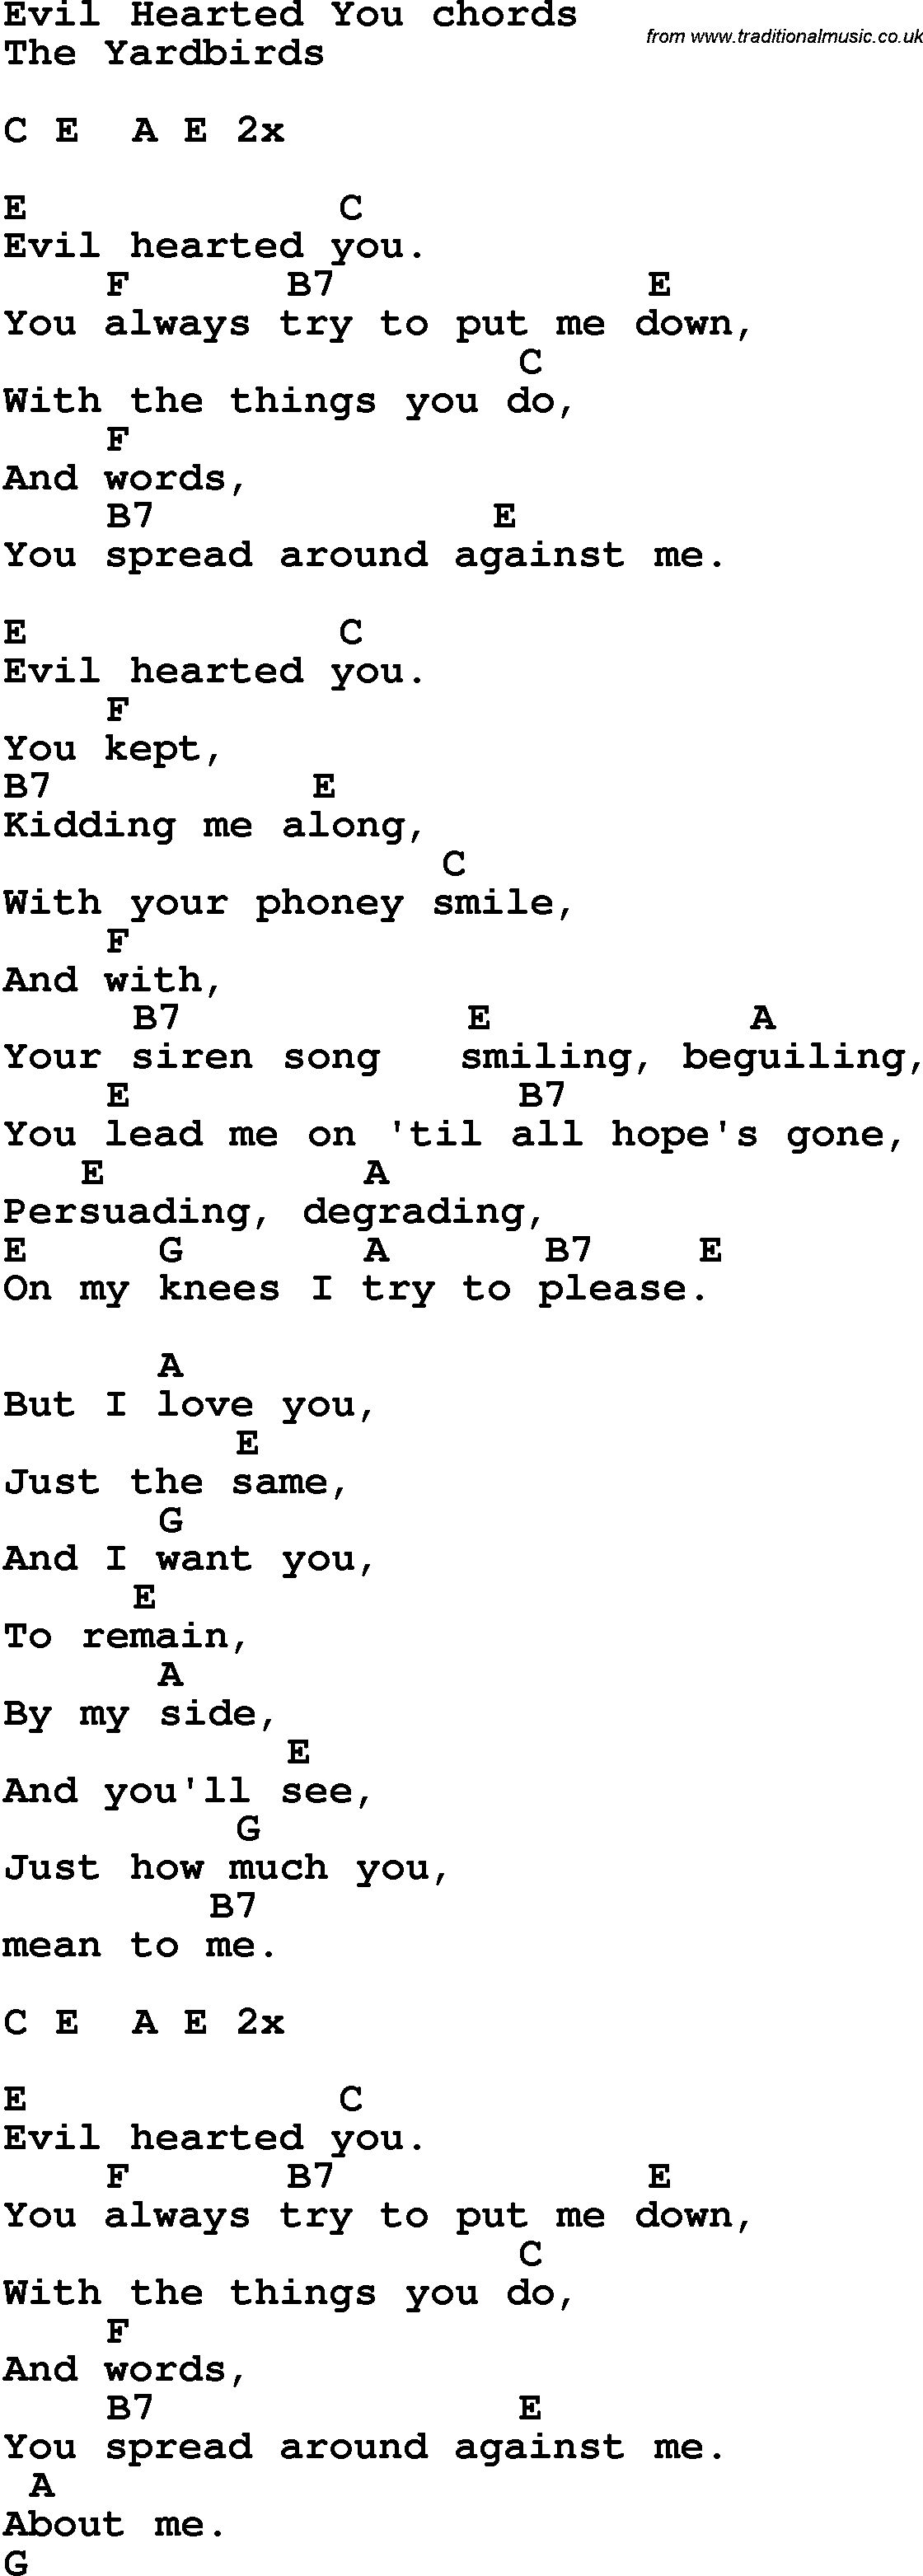 Song Lyrics with guitar chords for Evil Hearted You